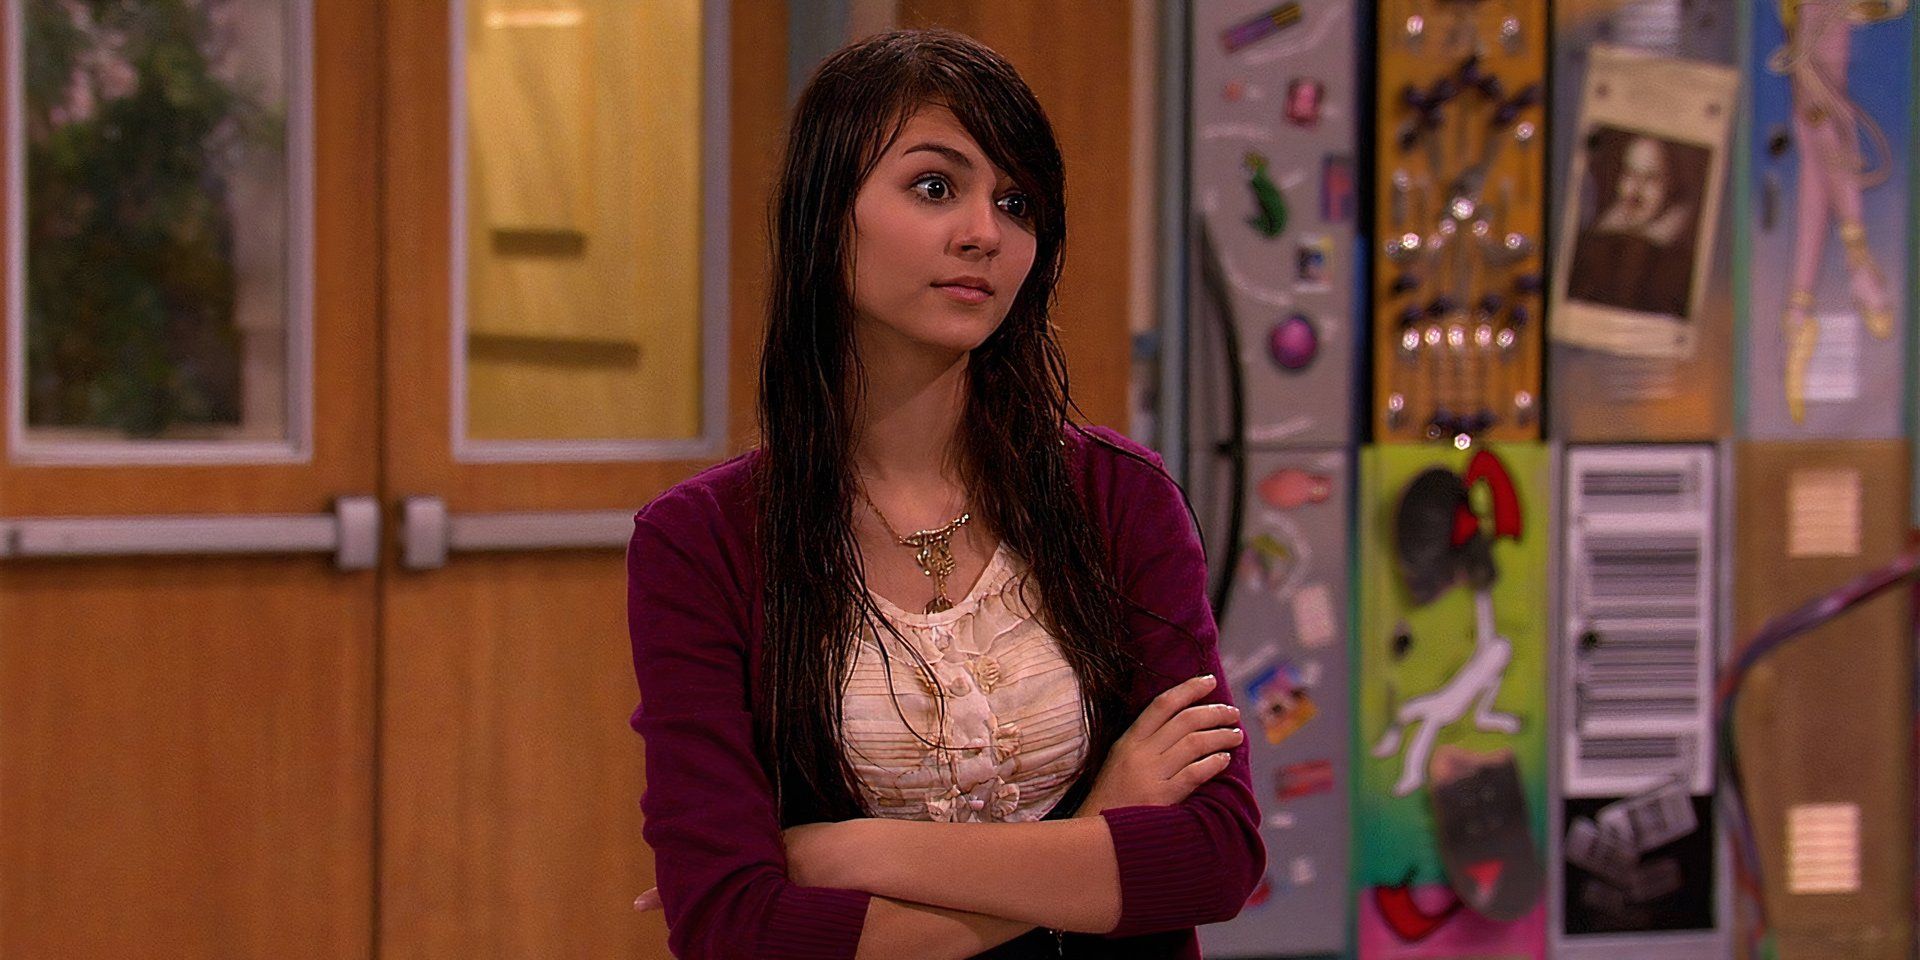 Victoria Justice Breaks Silence On Nickelodeon’s Dan Schneider: “I Was Being Treated Unfairly”